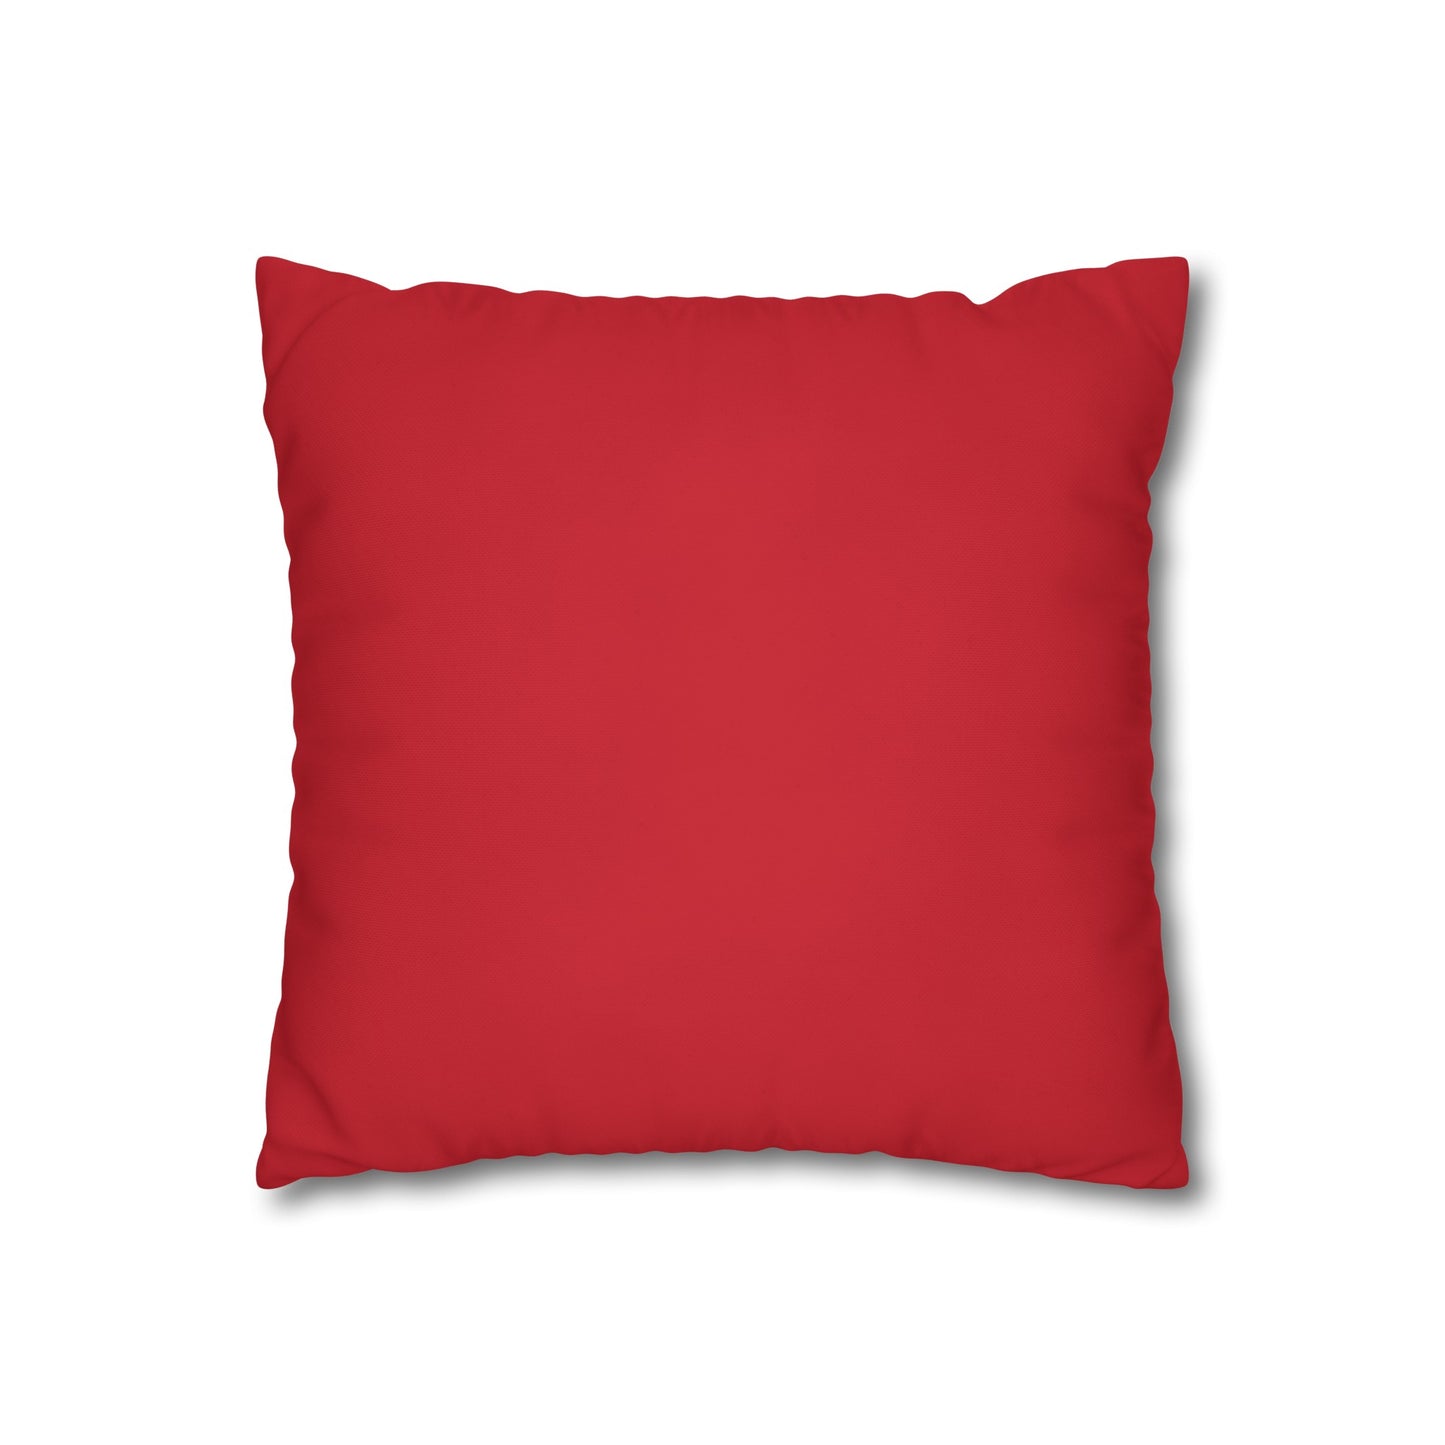 Red Robin Cushion Cover